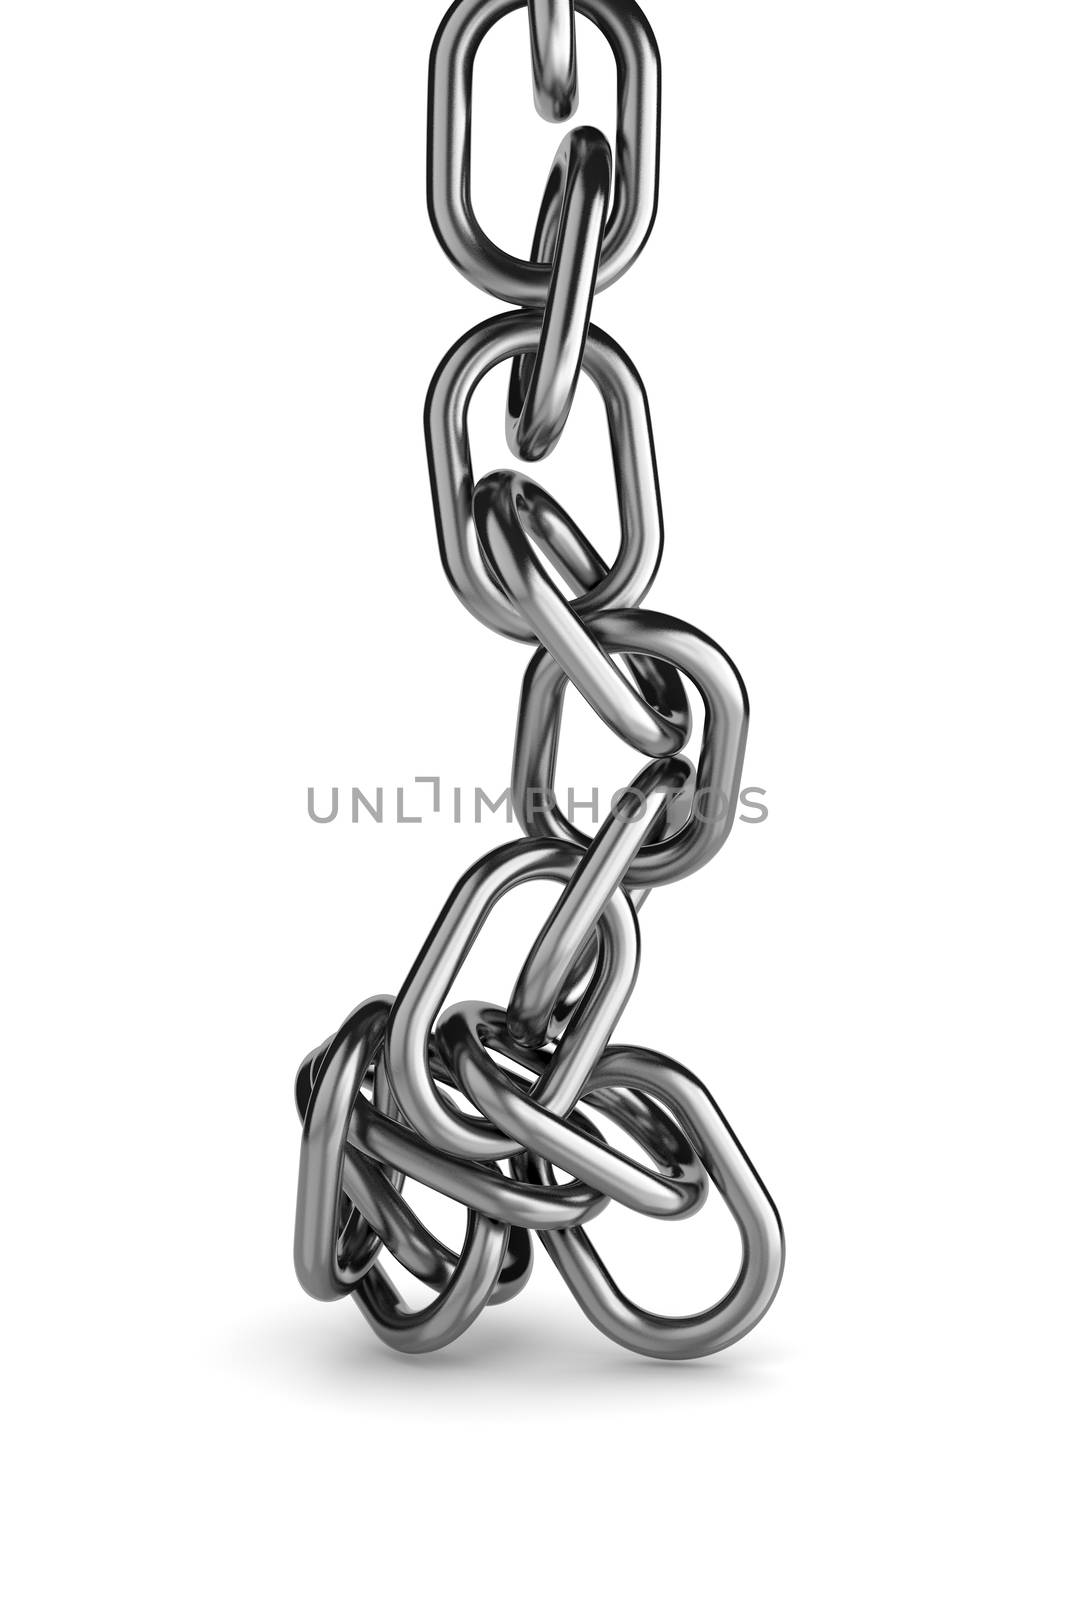 Unbind Metal Chain by make